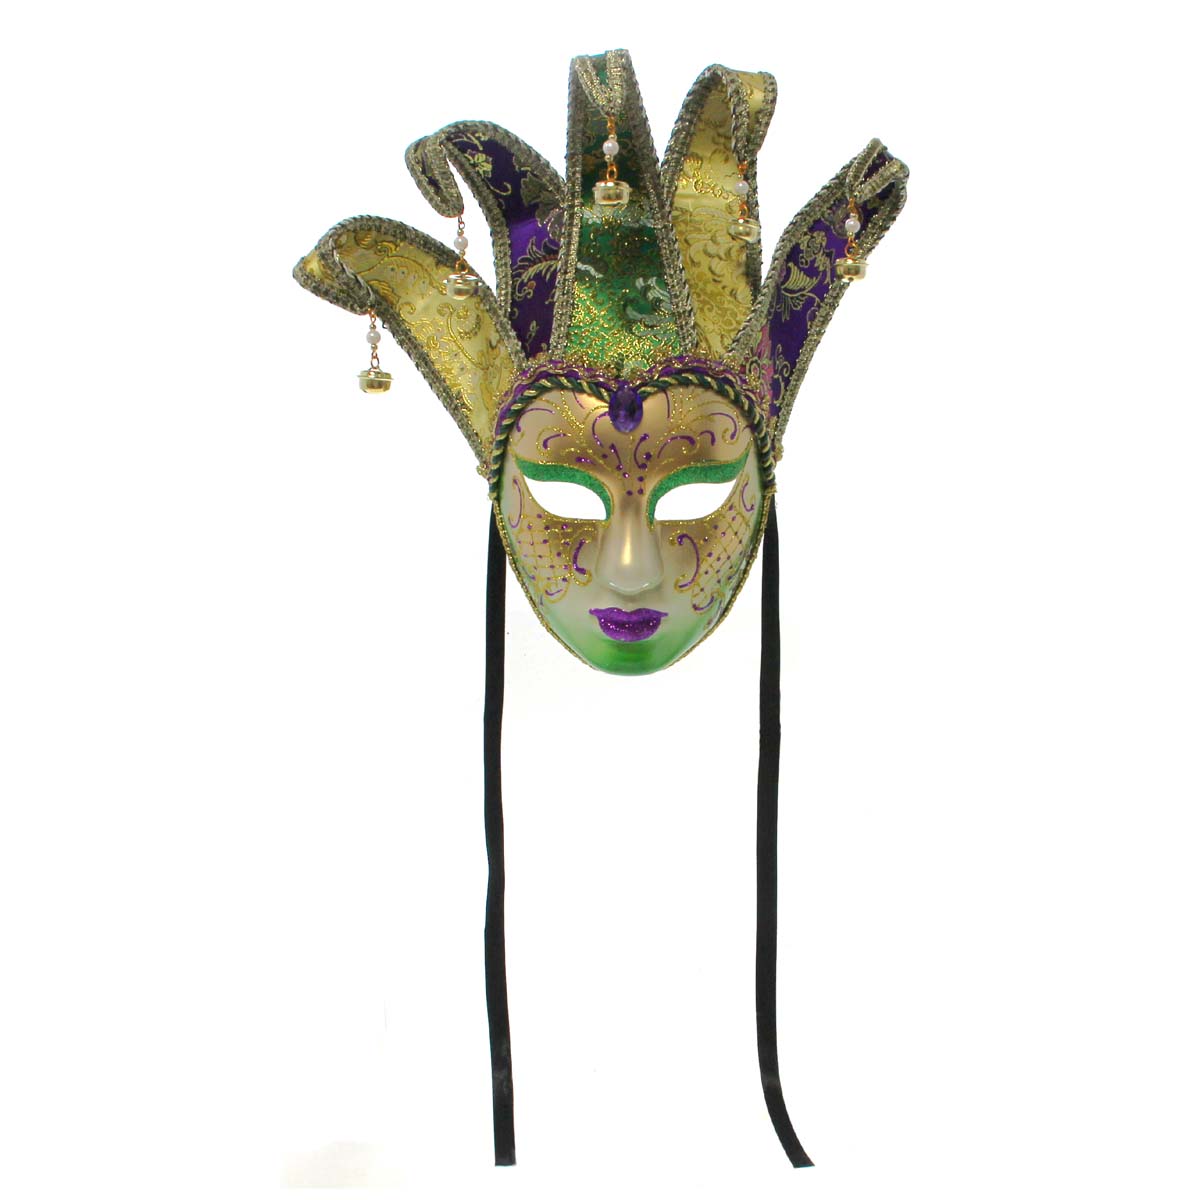 Large Decorative Mardi Gras Mask with 5 Horns